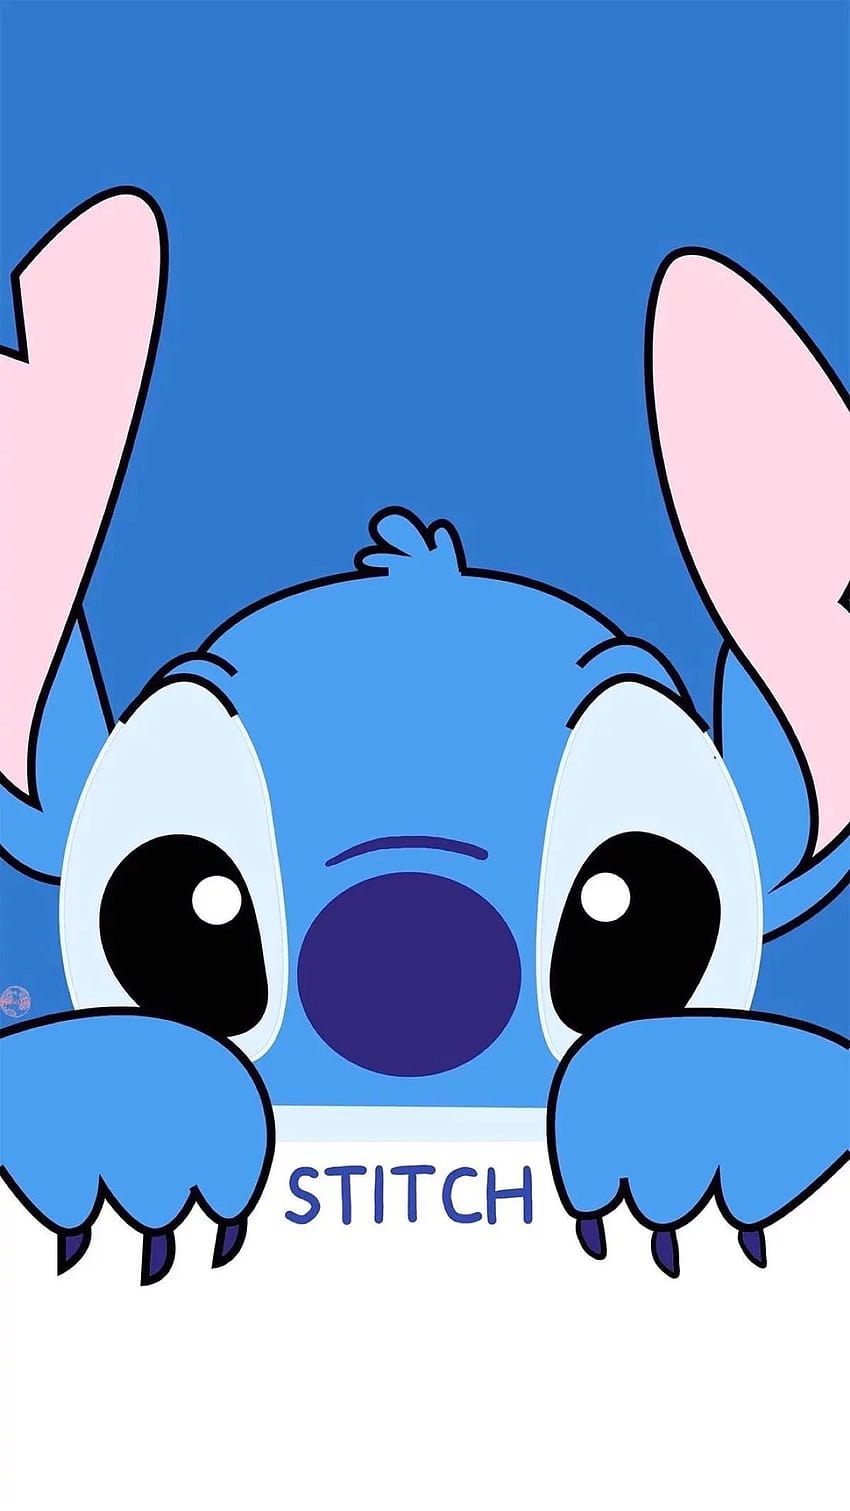 Download Cute Aesthetic Stitch With Heart Stencils Wallpaper  Wallpapers com